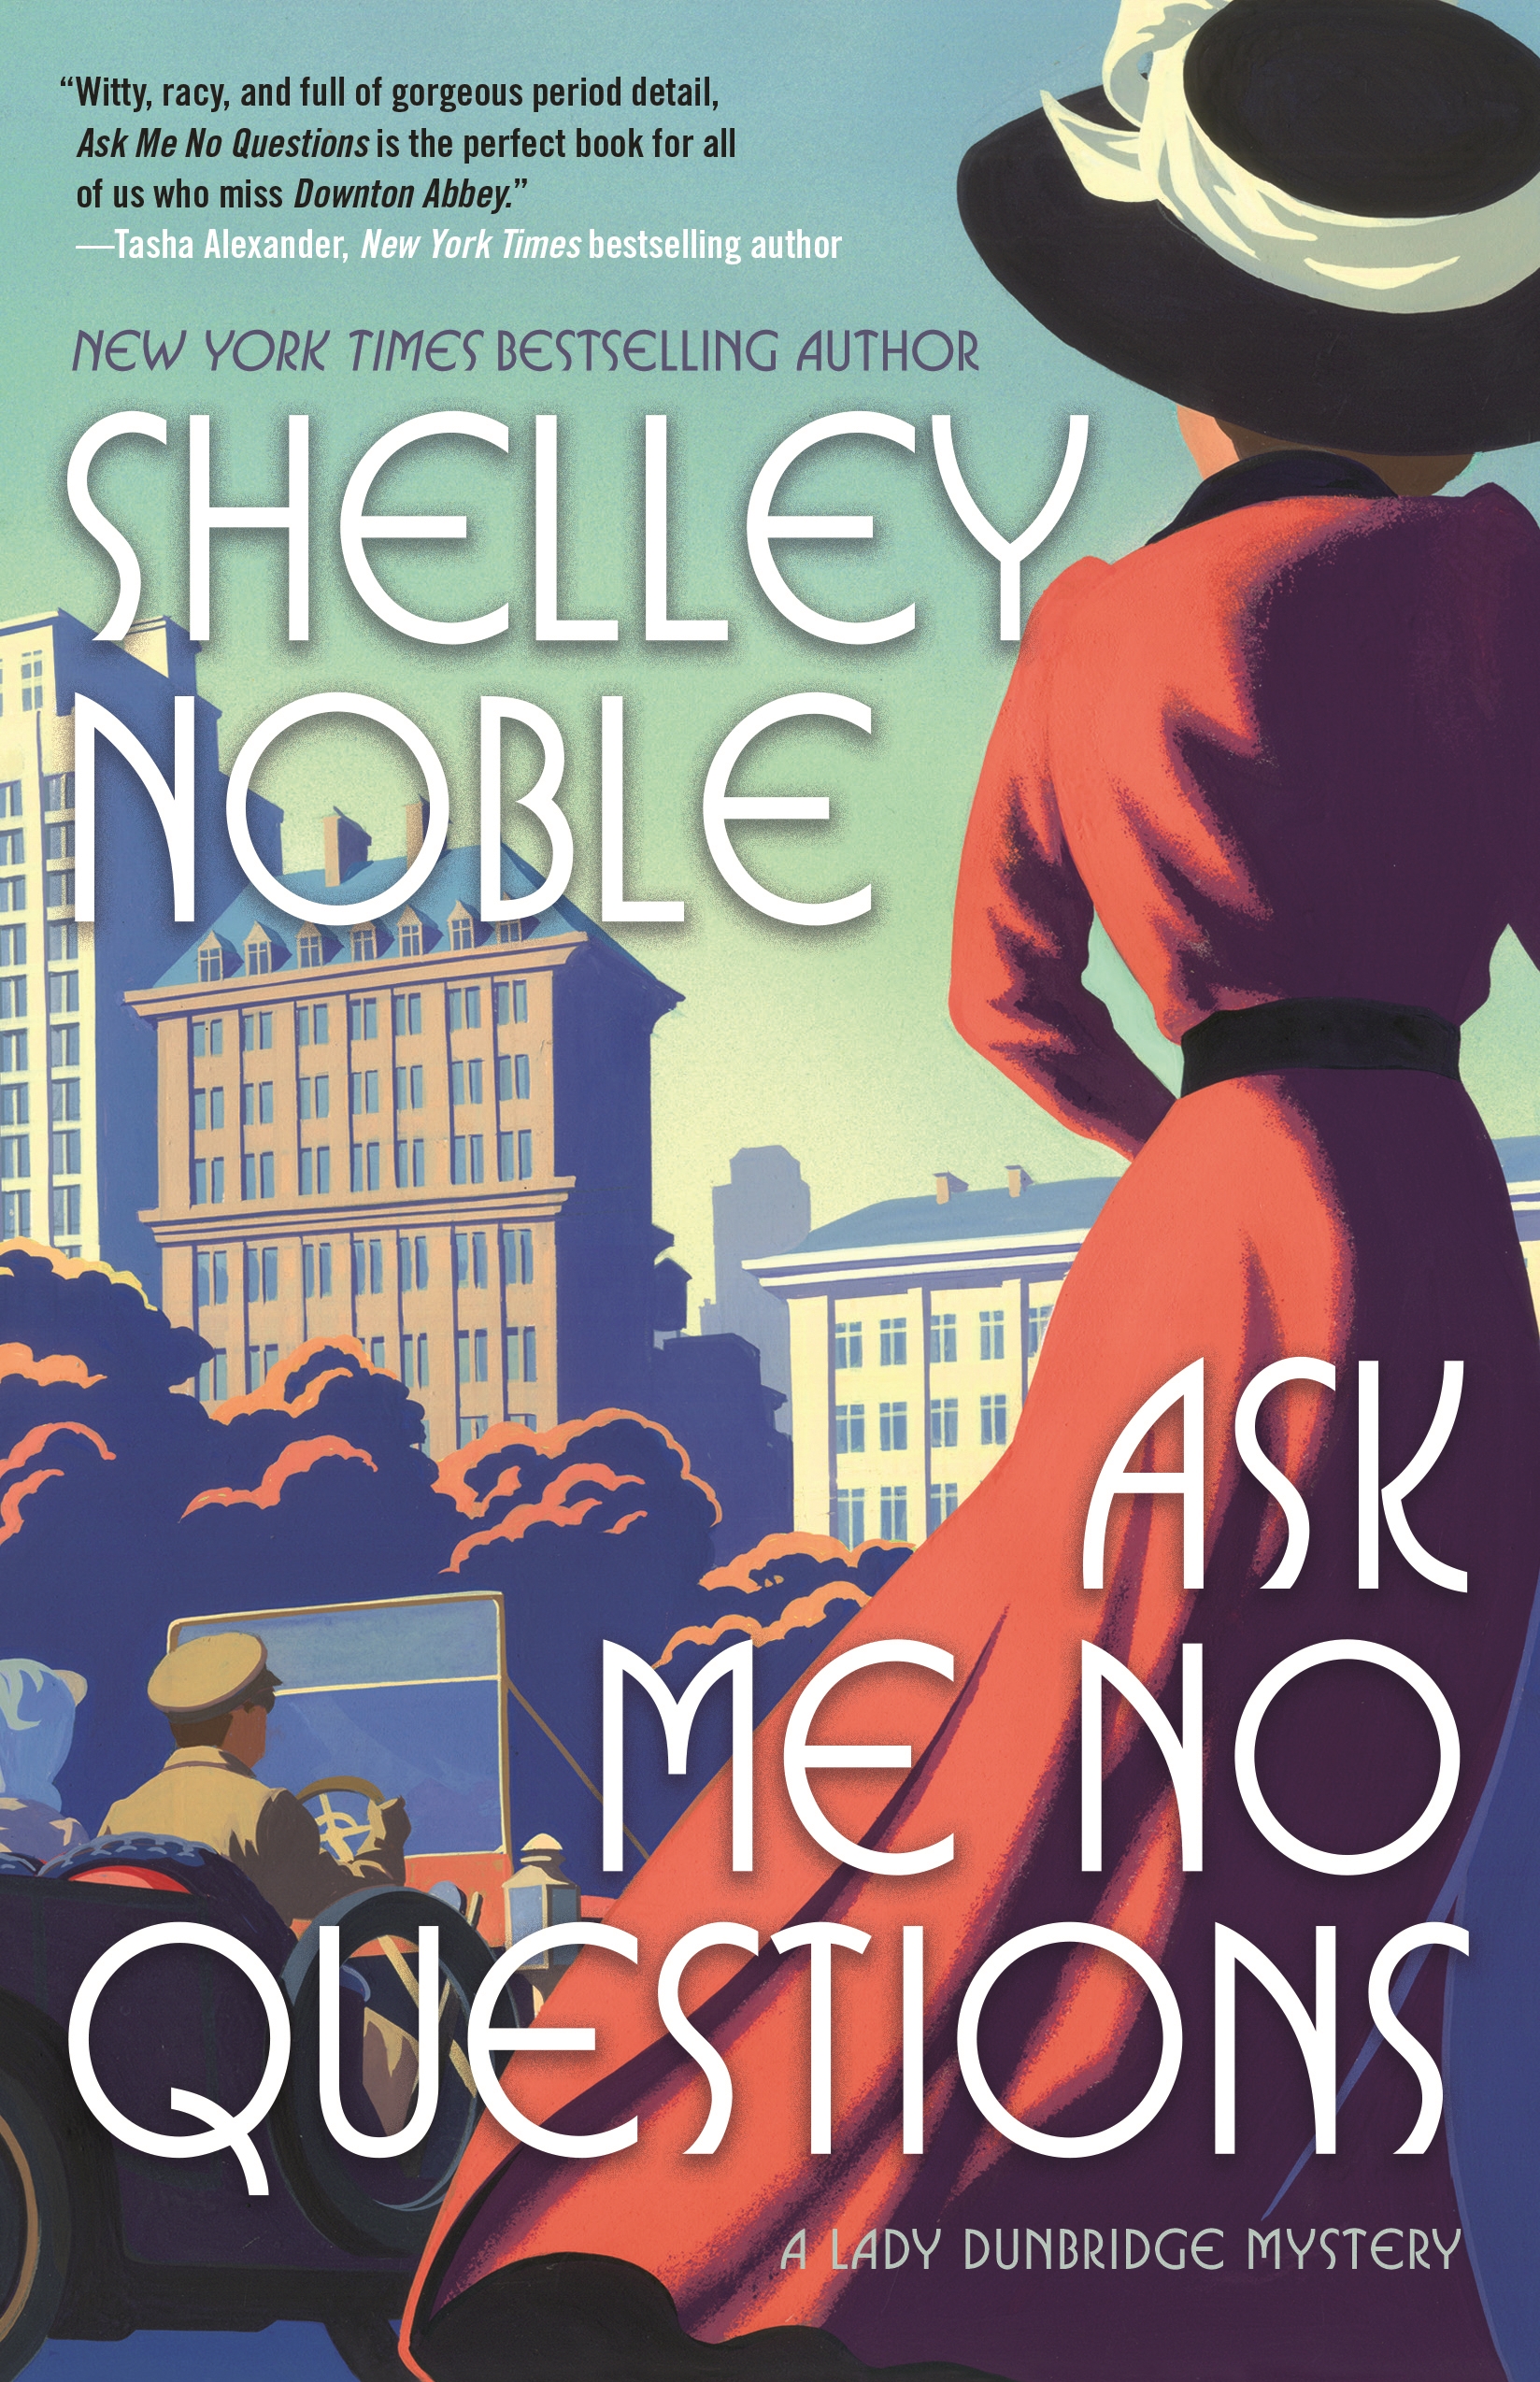 Ask Me No Questions : A Lady Dunbridge Mystery by Shelley Noble